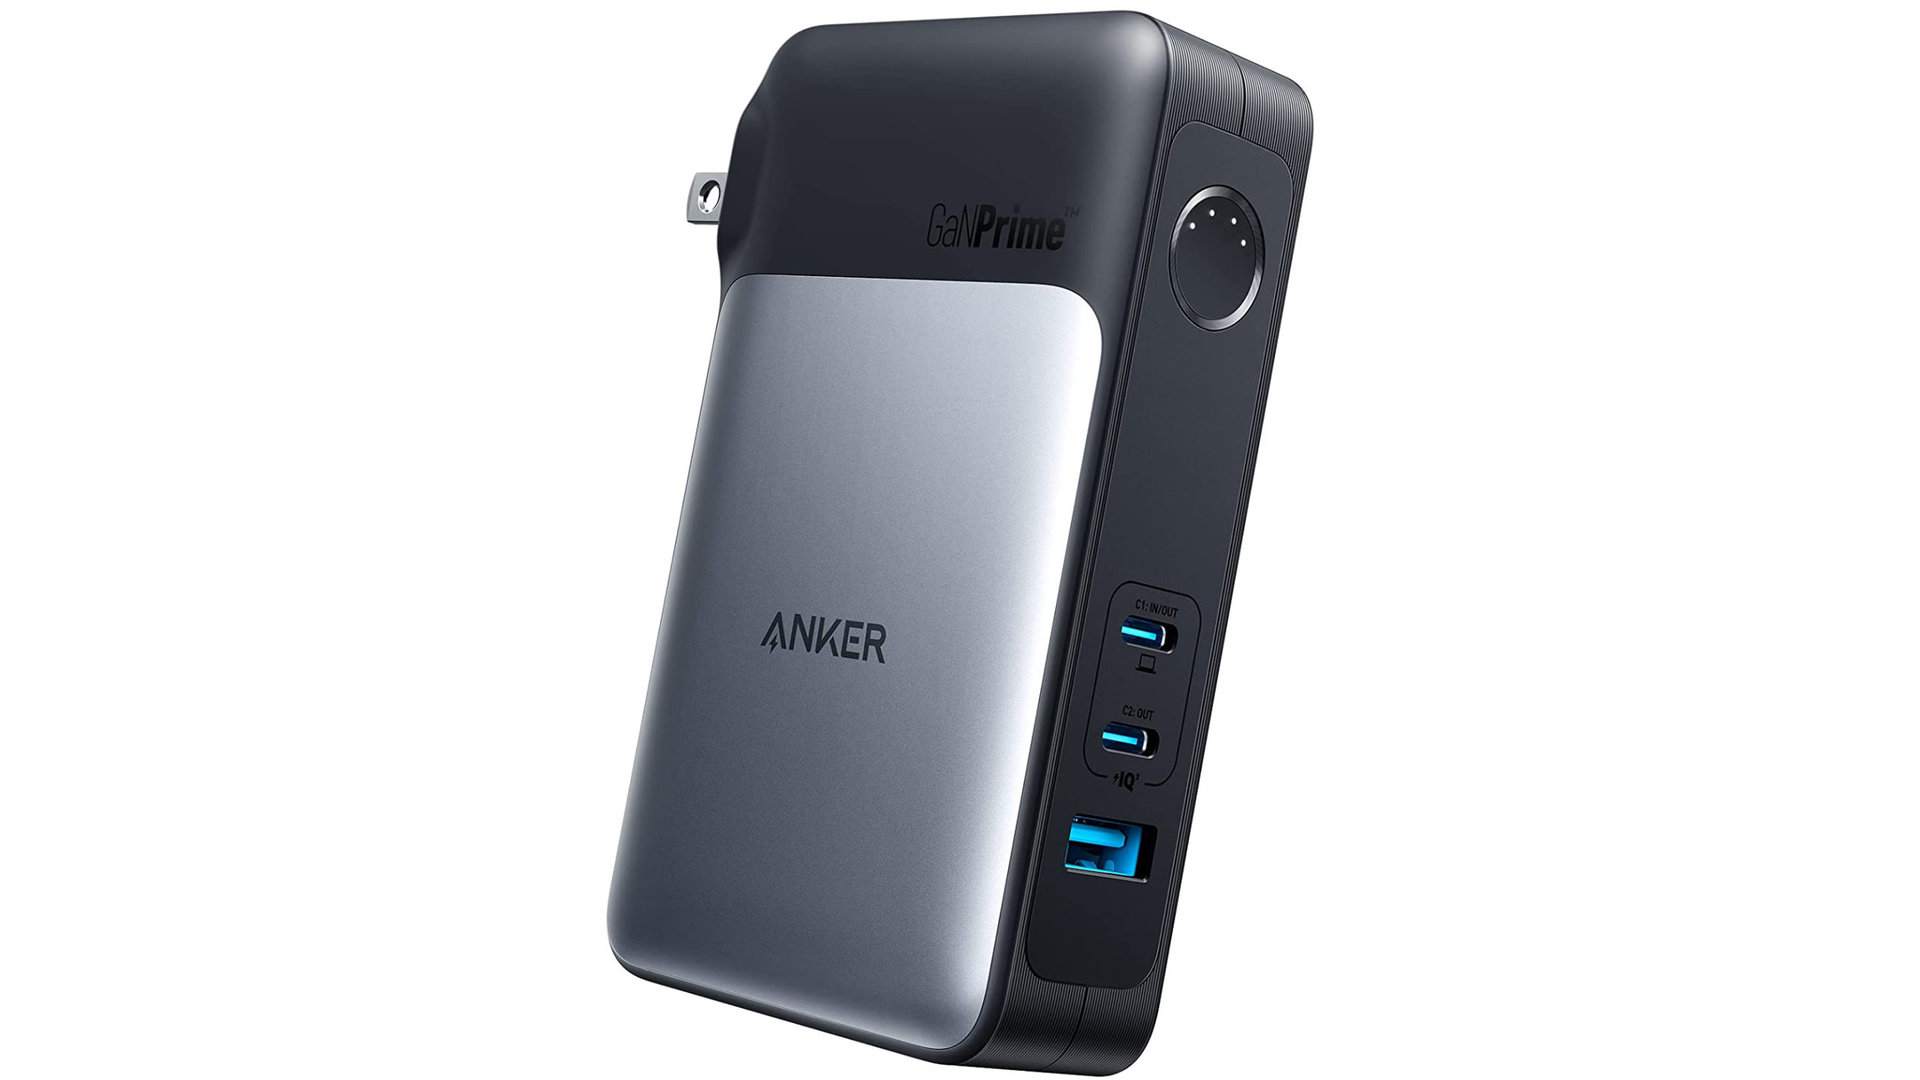 Anker 733 Power Bank - Portable chargers and power banks for iPhone